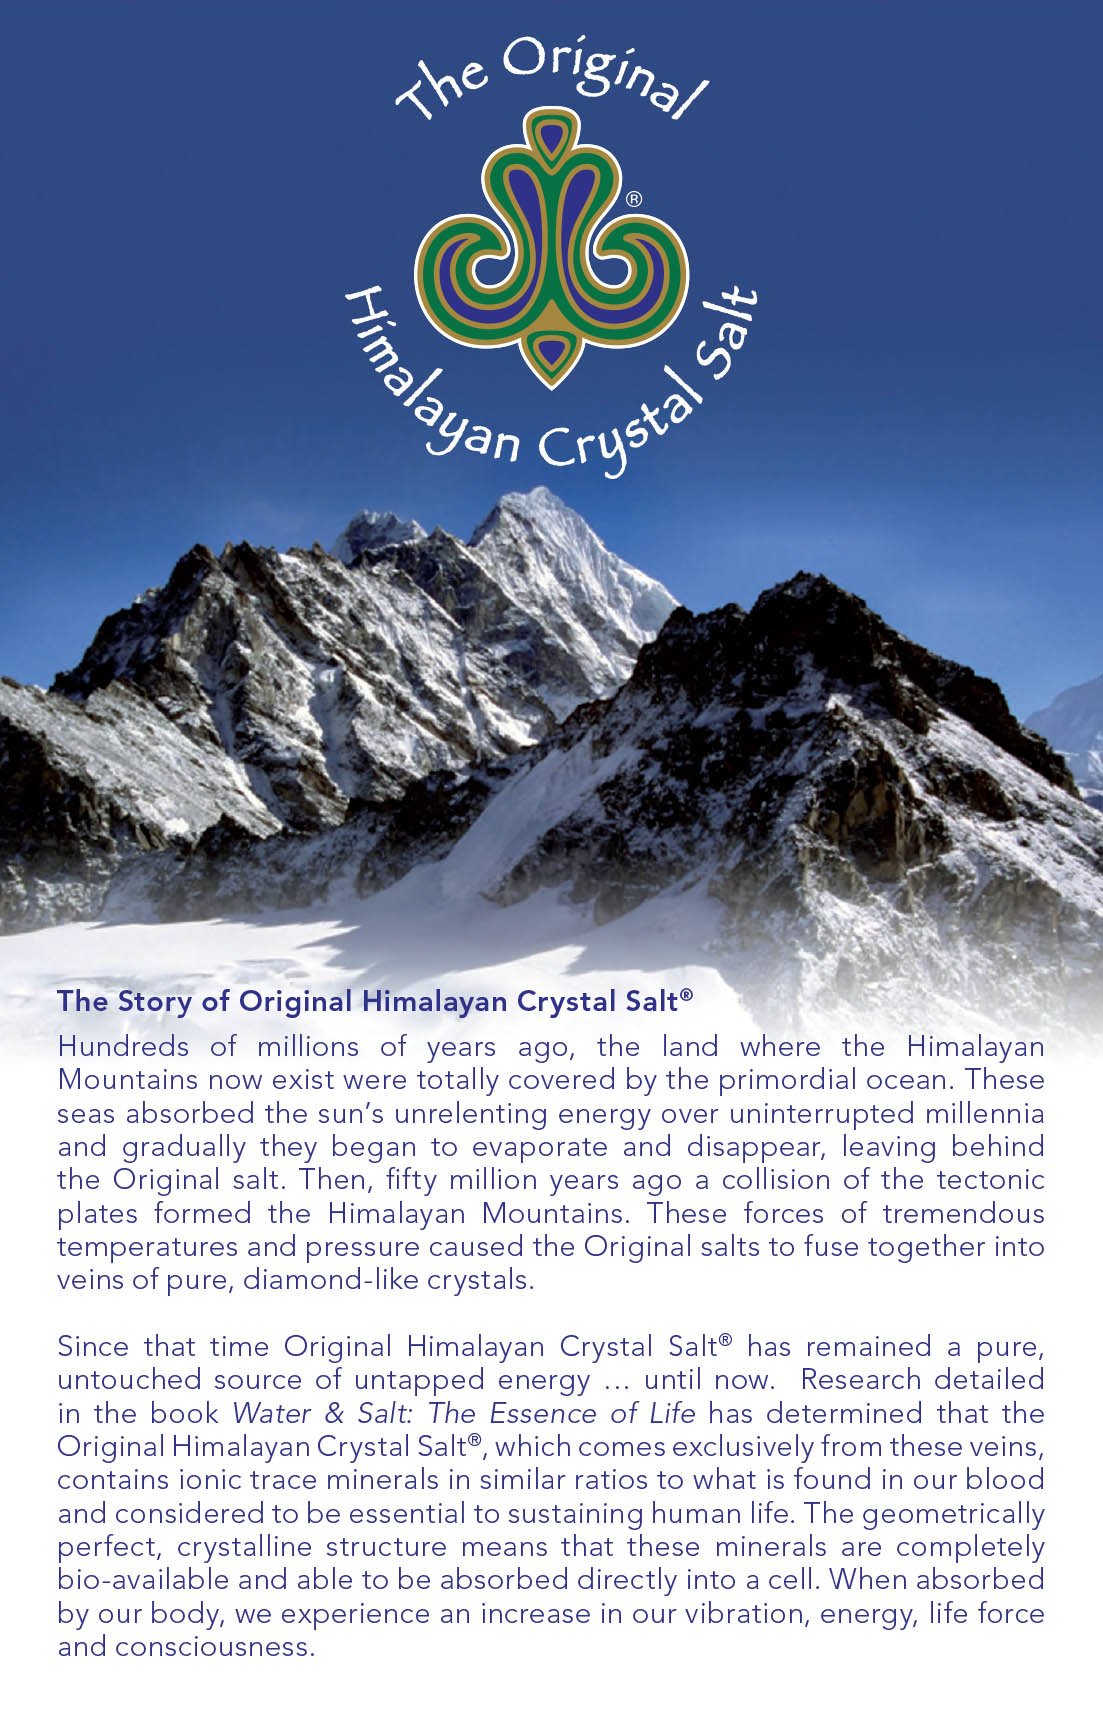 Bath Crystals right side of box with blue sky, mountains, snow and The story of Original Himalayan Crystal Salt: Hundreds of millions of years ago, the land where the HImalayan Mountains now exists were totally covered by the primordial ocean. These seas absorbed the sun’s unrelenting energy over uninterrupted millennia and gradually they began to evaporate and disappear, leaving behind the Original Salt.